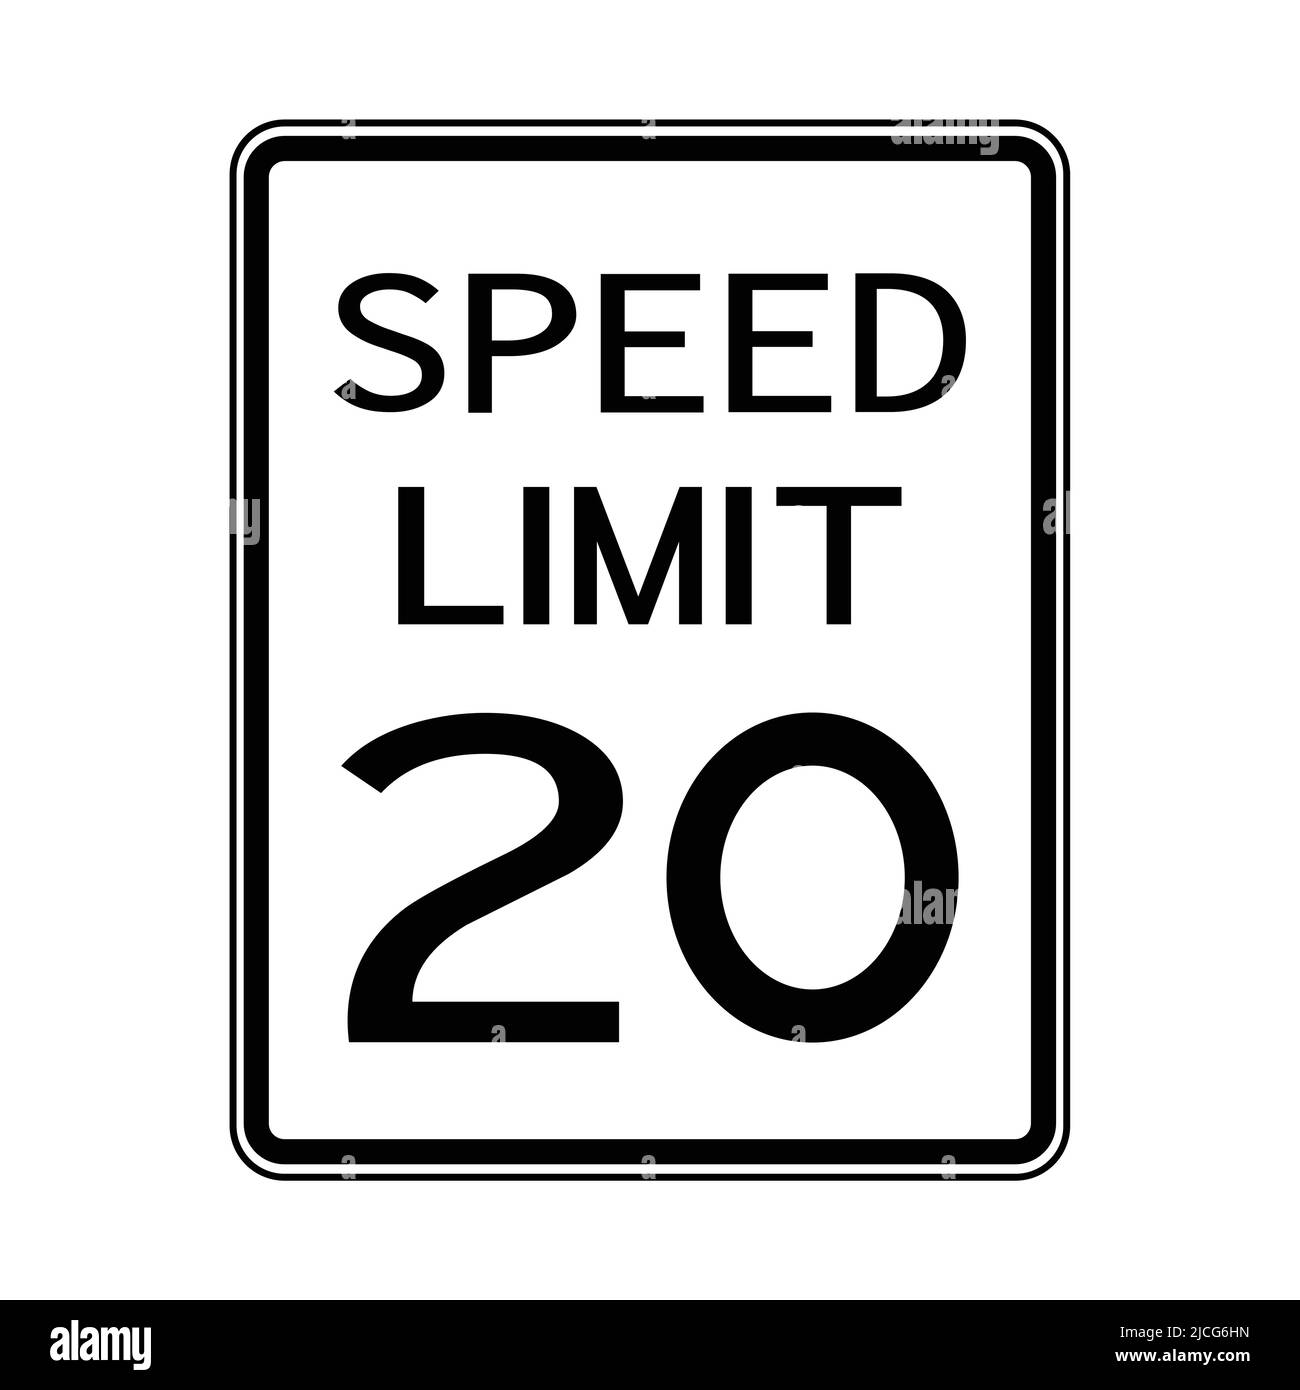 USA Road Traffic Transportation Sign: Speed Limit 20 On White Background,Vector Illustration Stock Vector